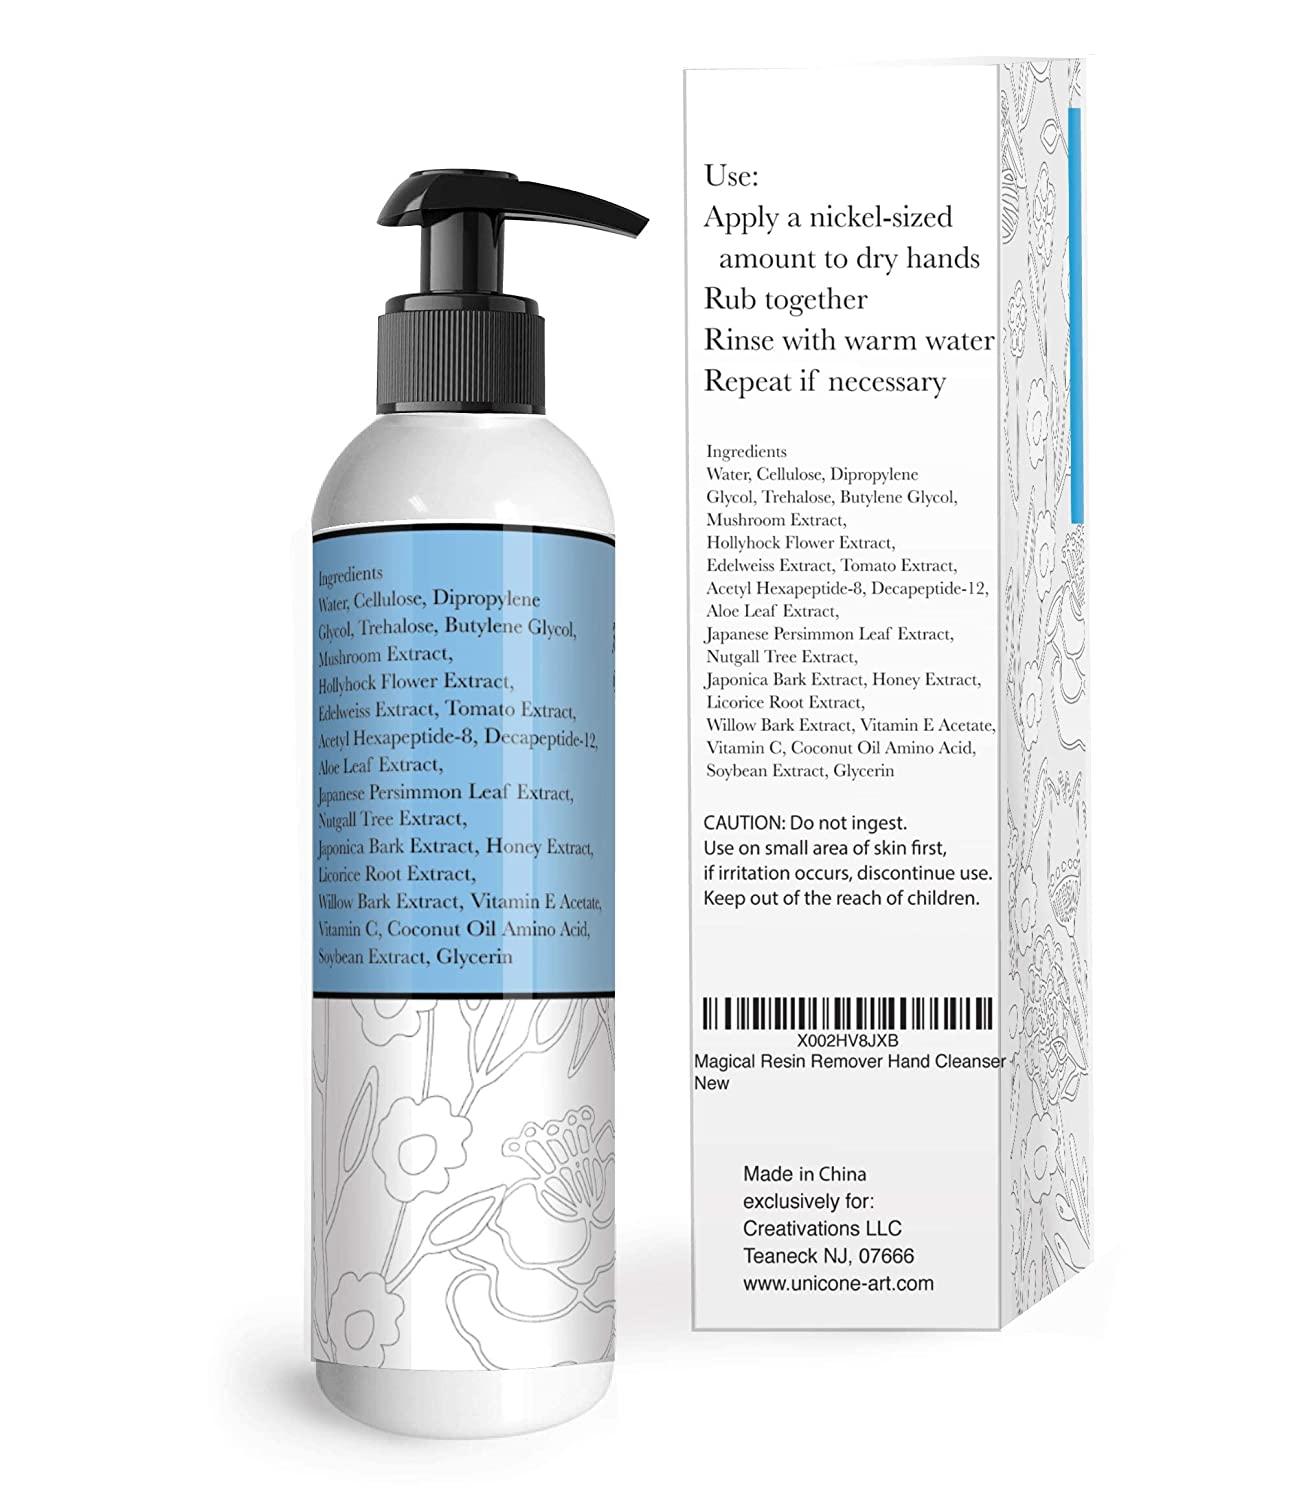 Magical Resin Remover - All Natural - Hand Gel Cleanser - Soap -  Moisturizing - for Artists - for use with resin, glue, silicone, paint,  epoxy, glitter - 8oz.